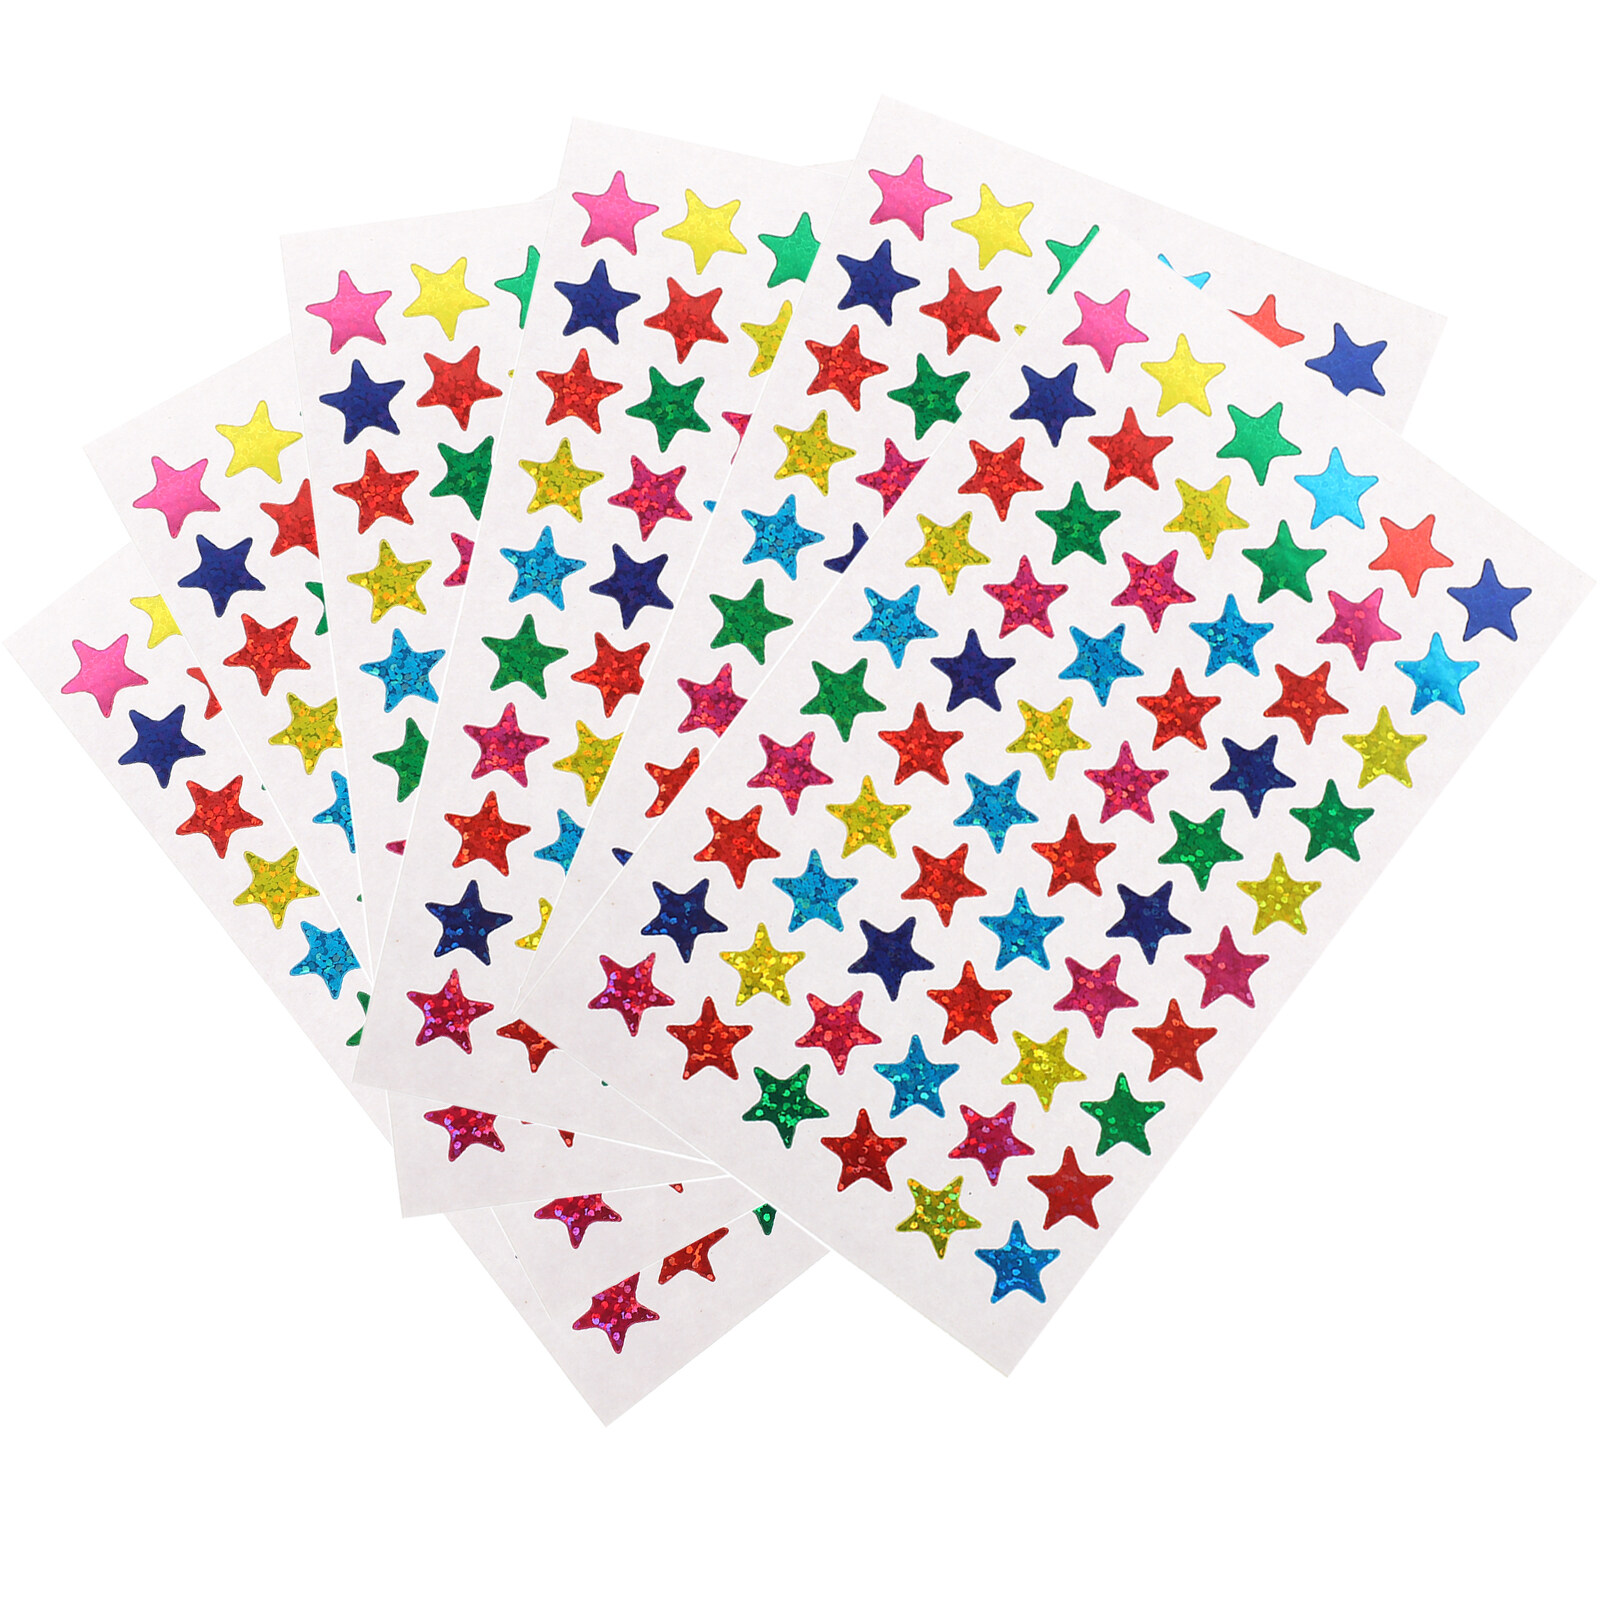 6 Sheets Holographic Star Stickers DIY Crafts Glitter Star Reward Stickers  Party Favors Supplies